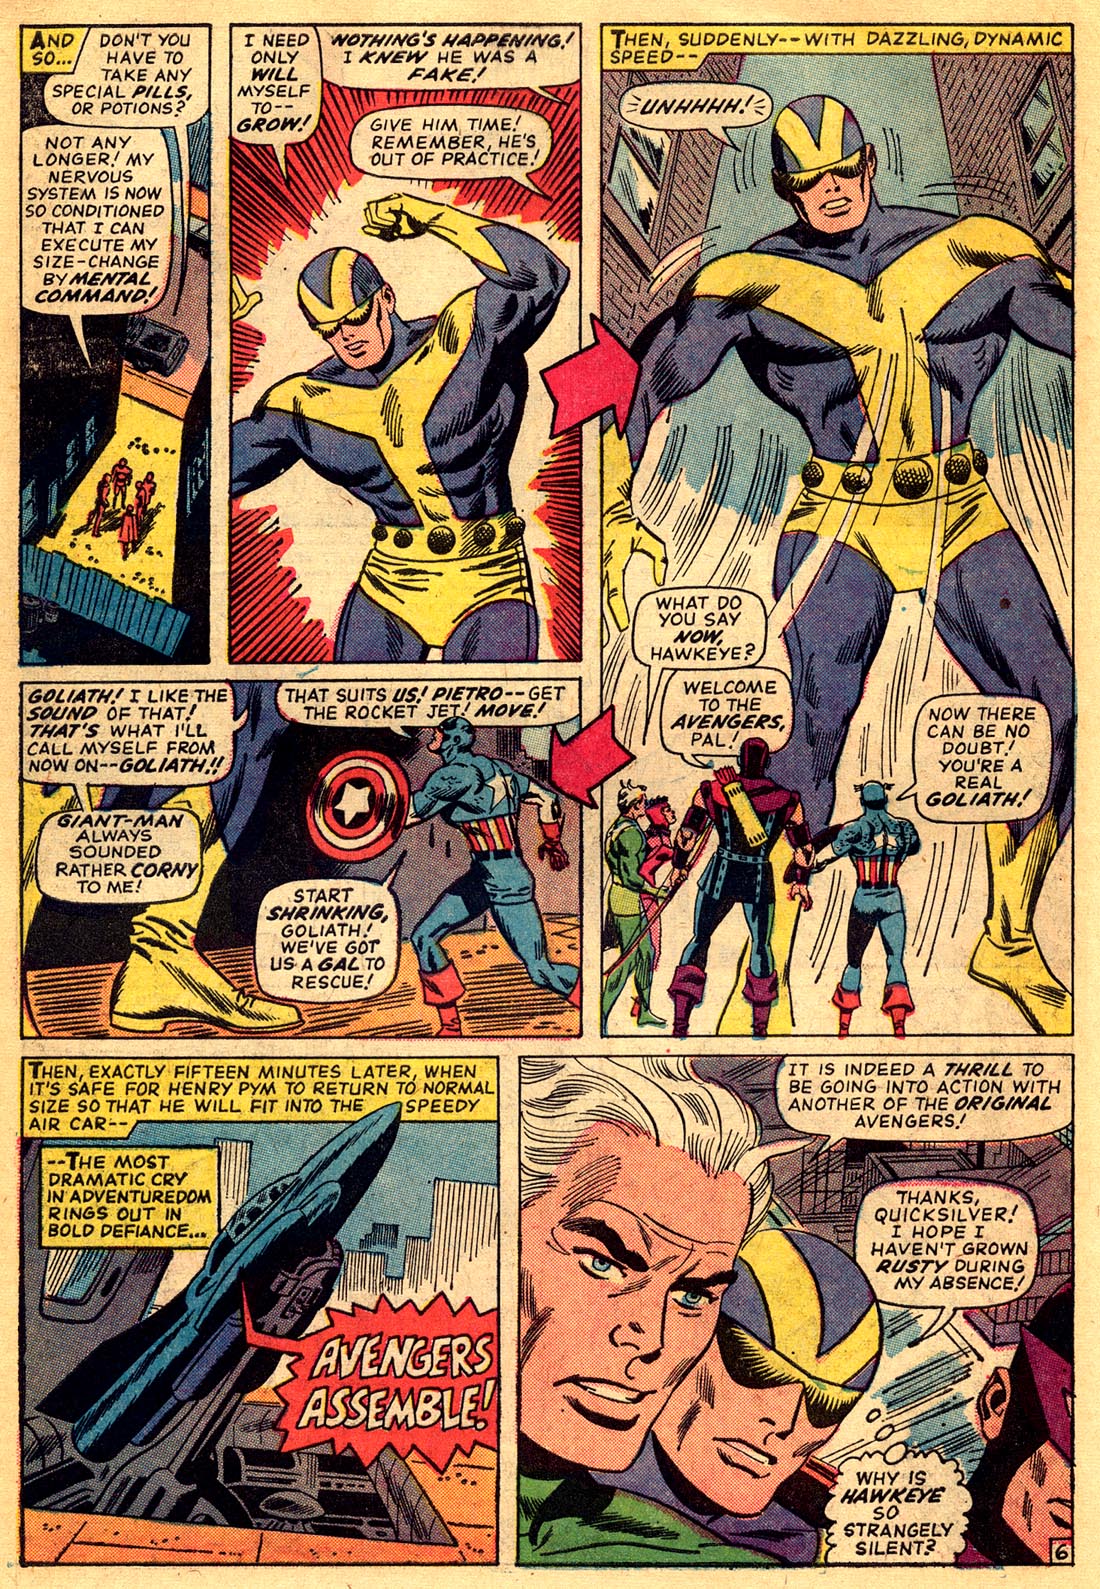 In 'Avengers' (1966) #28, Hank Pym performs an intelligence feat. In an attempt to re-join the Avengers, Hank Pym uses Pym Particles to alter his size and become the 100-foot Goliath.